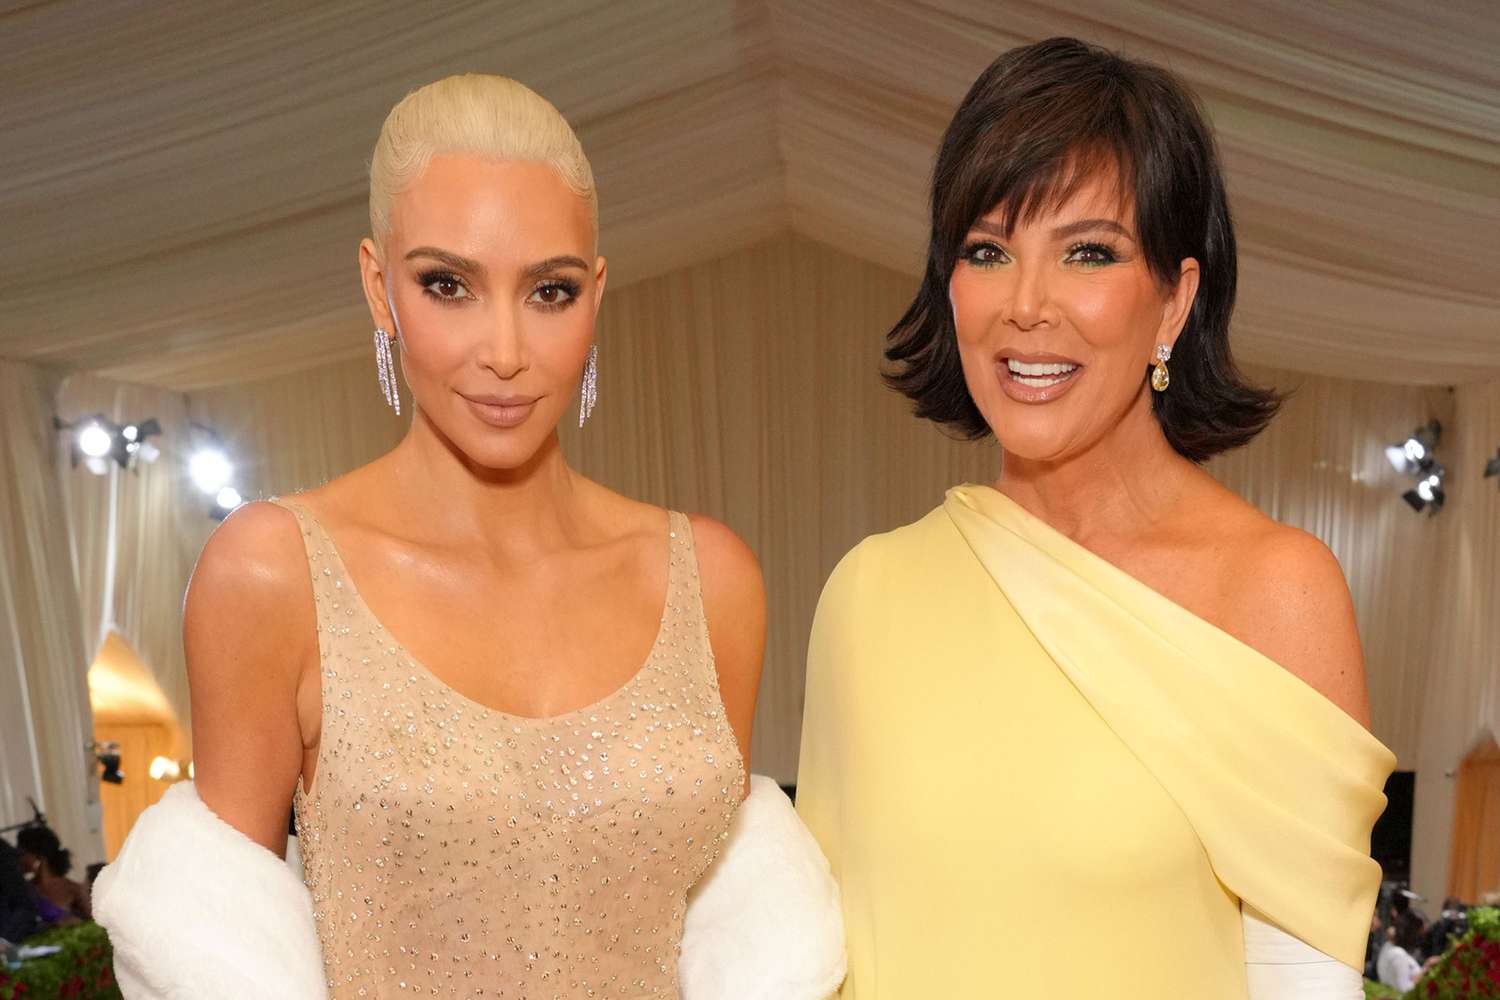 Kim Kardashian and Kris Jenner arrive at The 2022 Met Gala Celebrating "In America: An Anthology of Fashion" at The Metropolitan Museum of Art on May 02, 2022 in New York City.